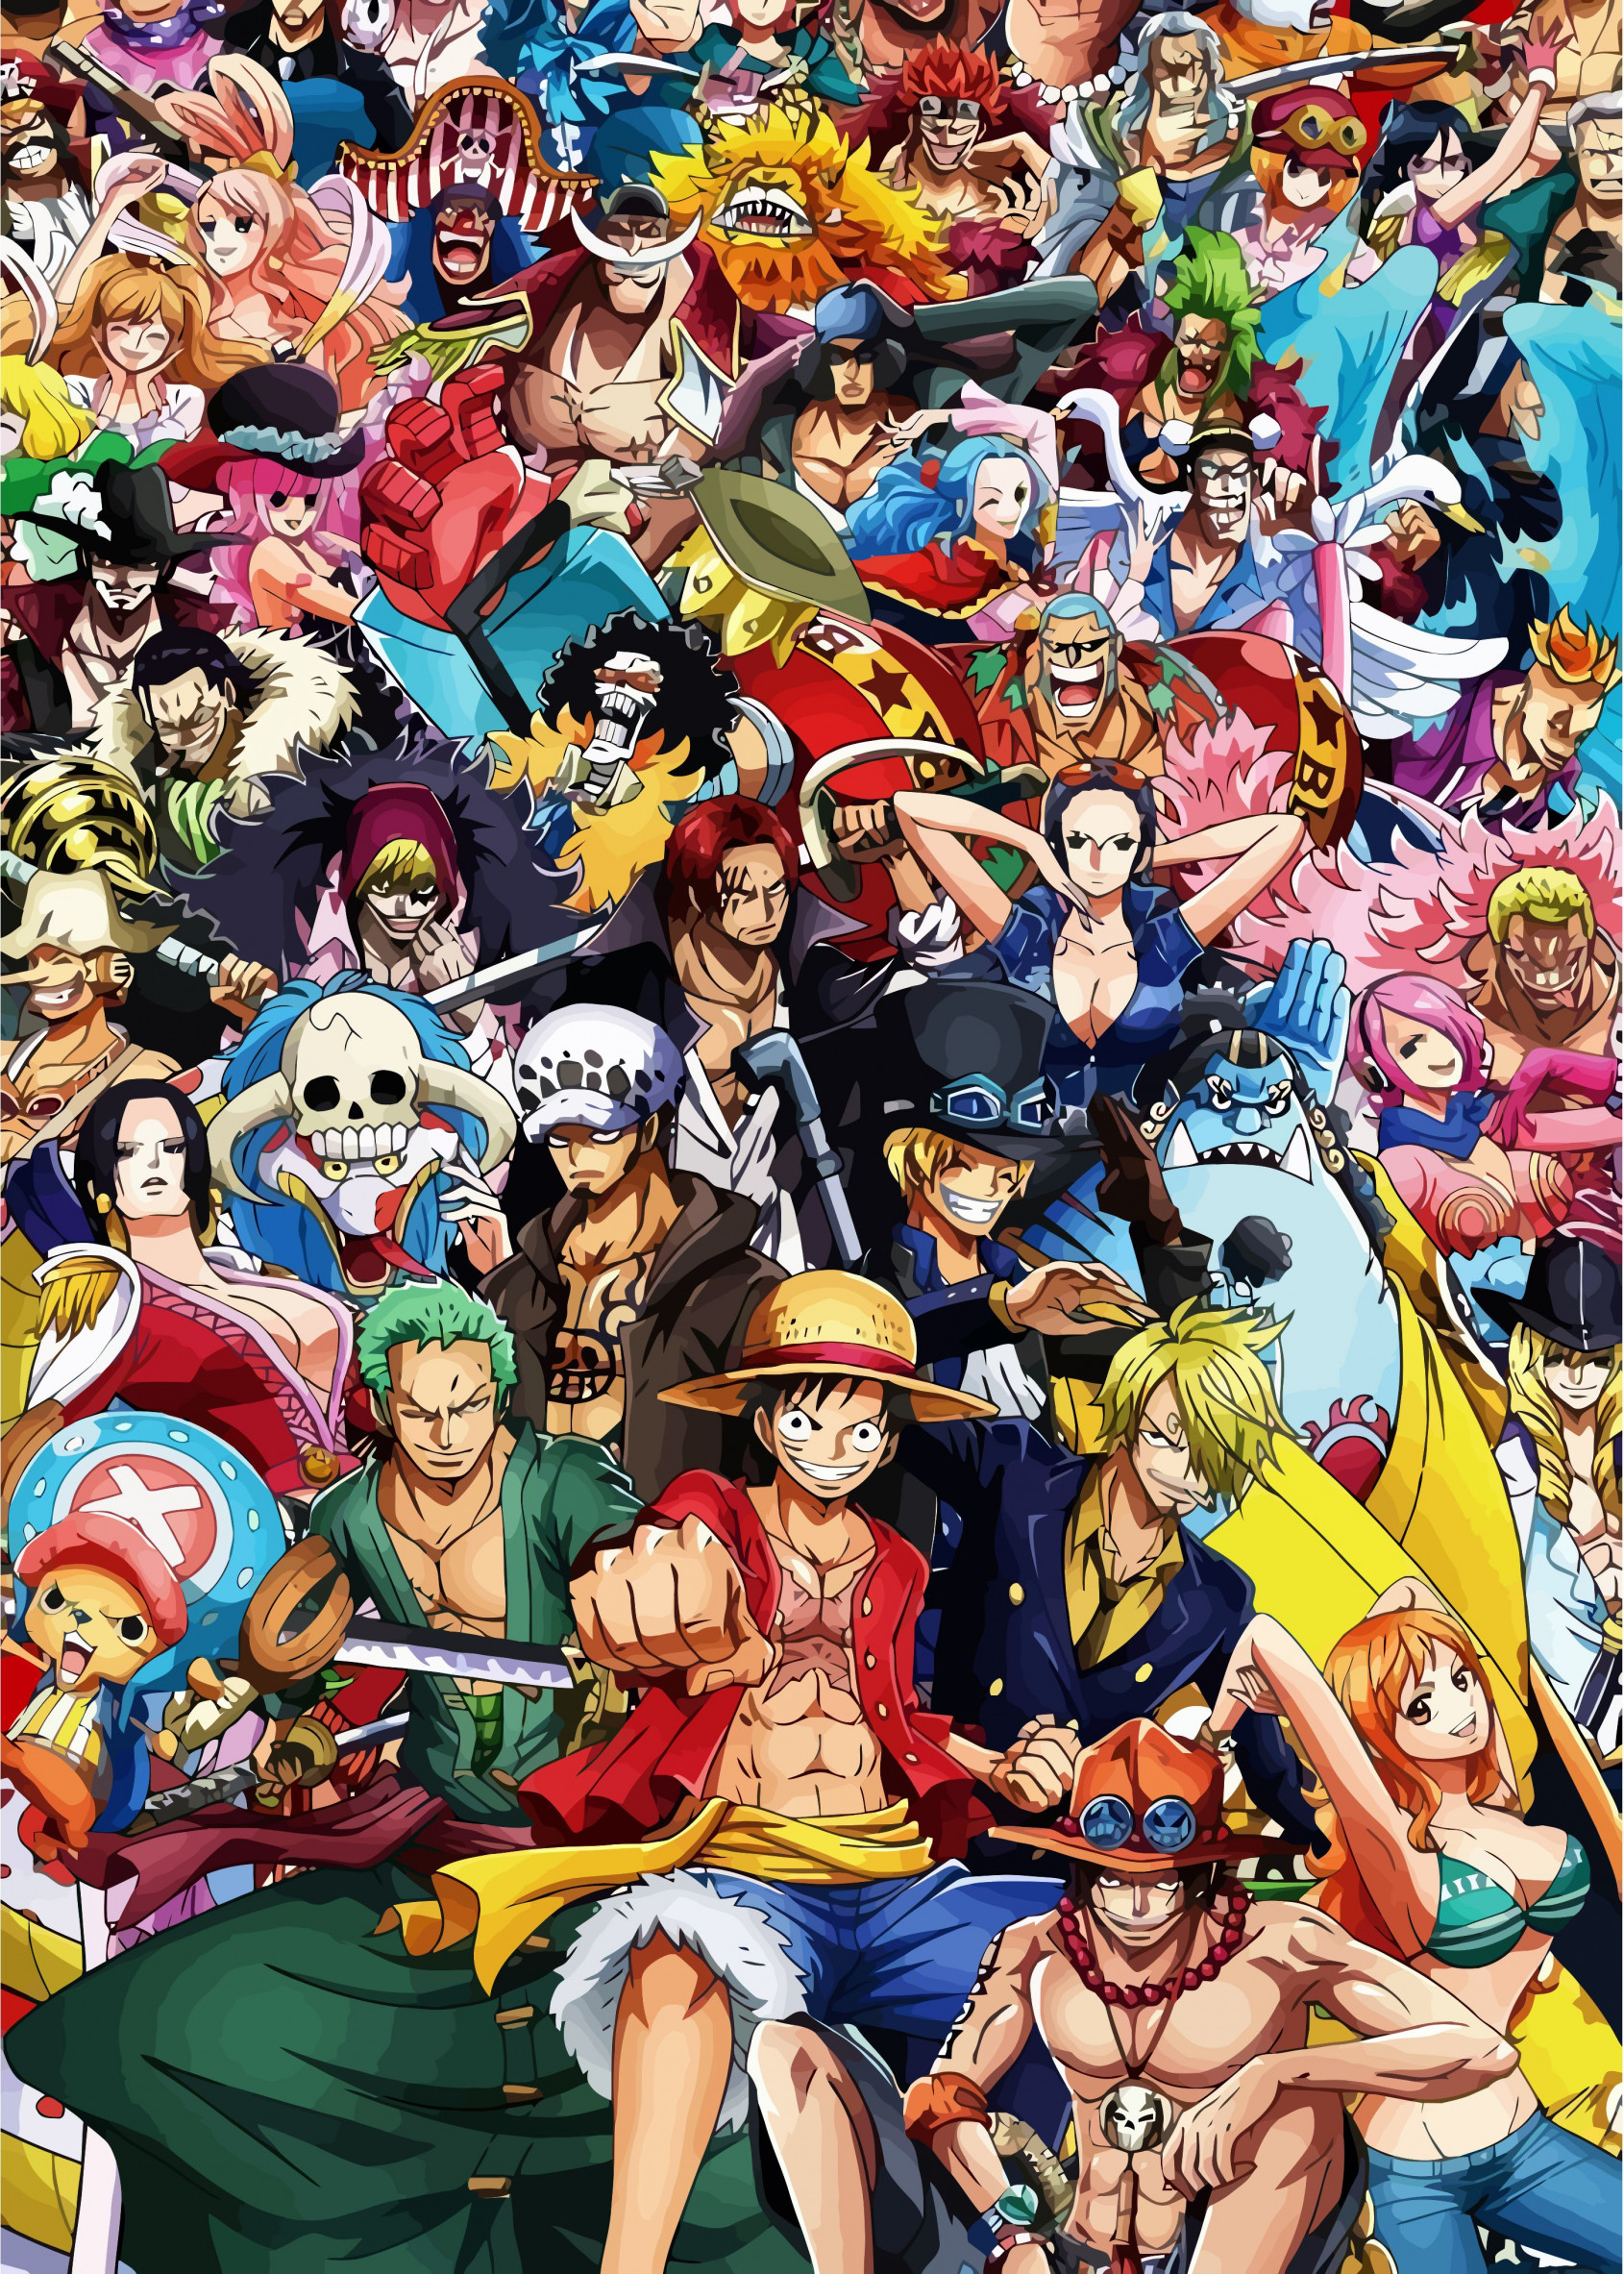 Can I skip to Timeskip in One Piece? - Quora